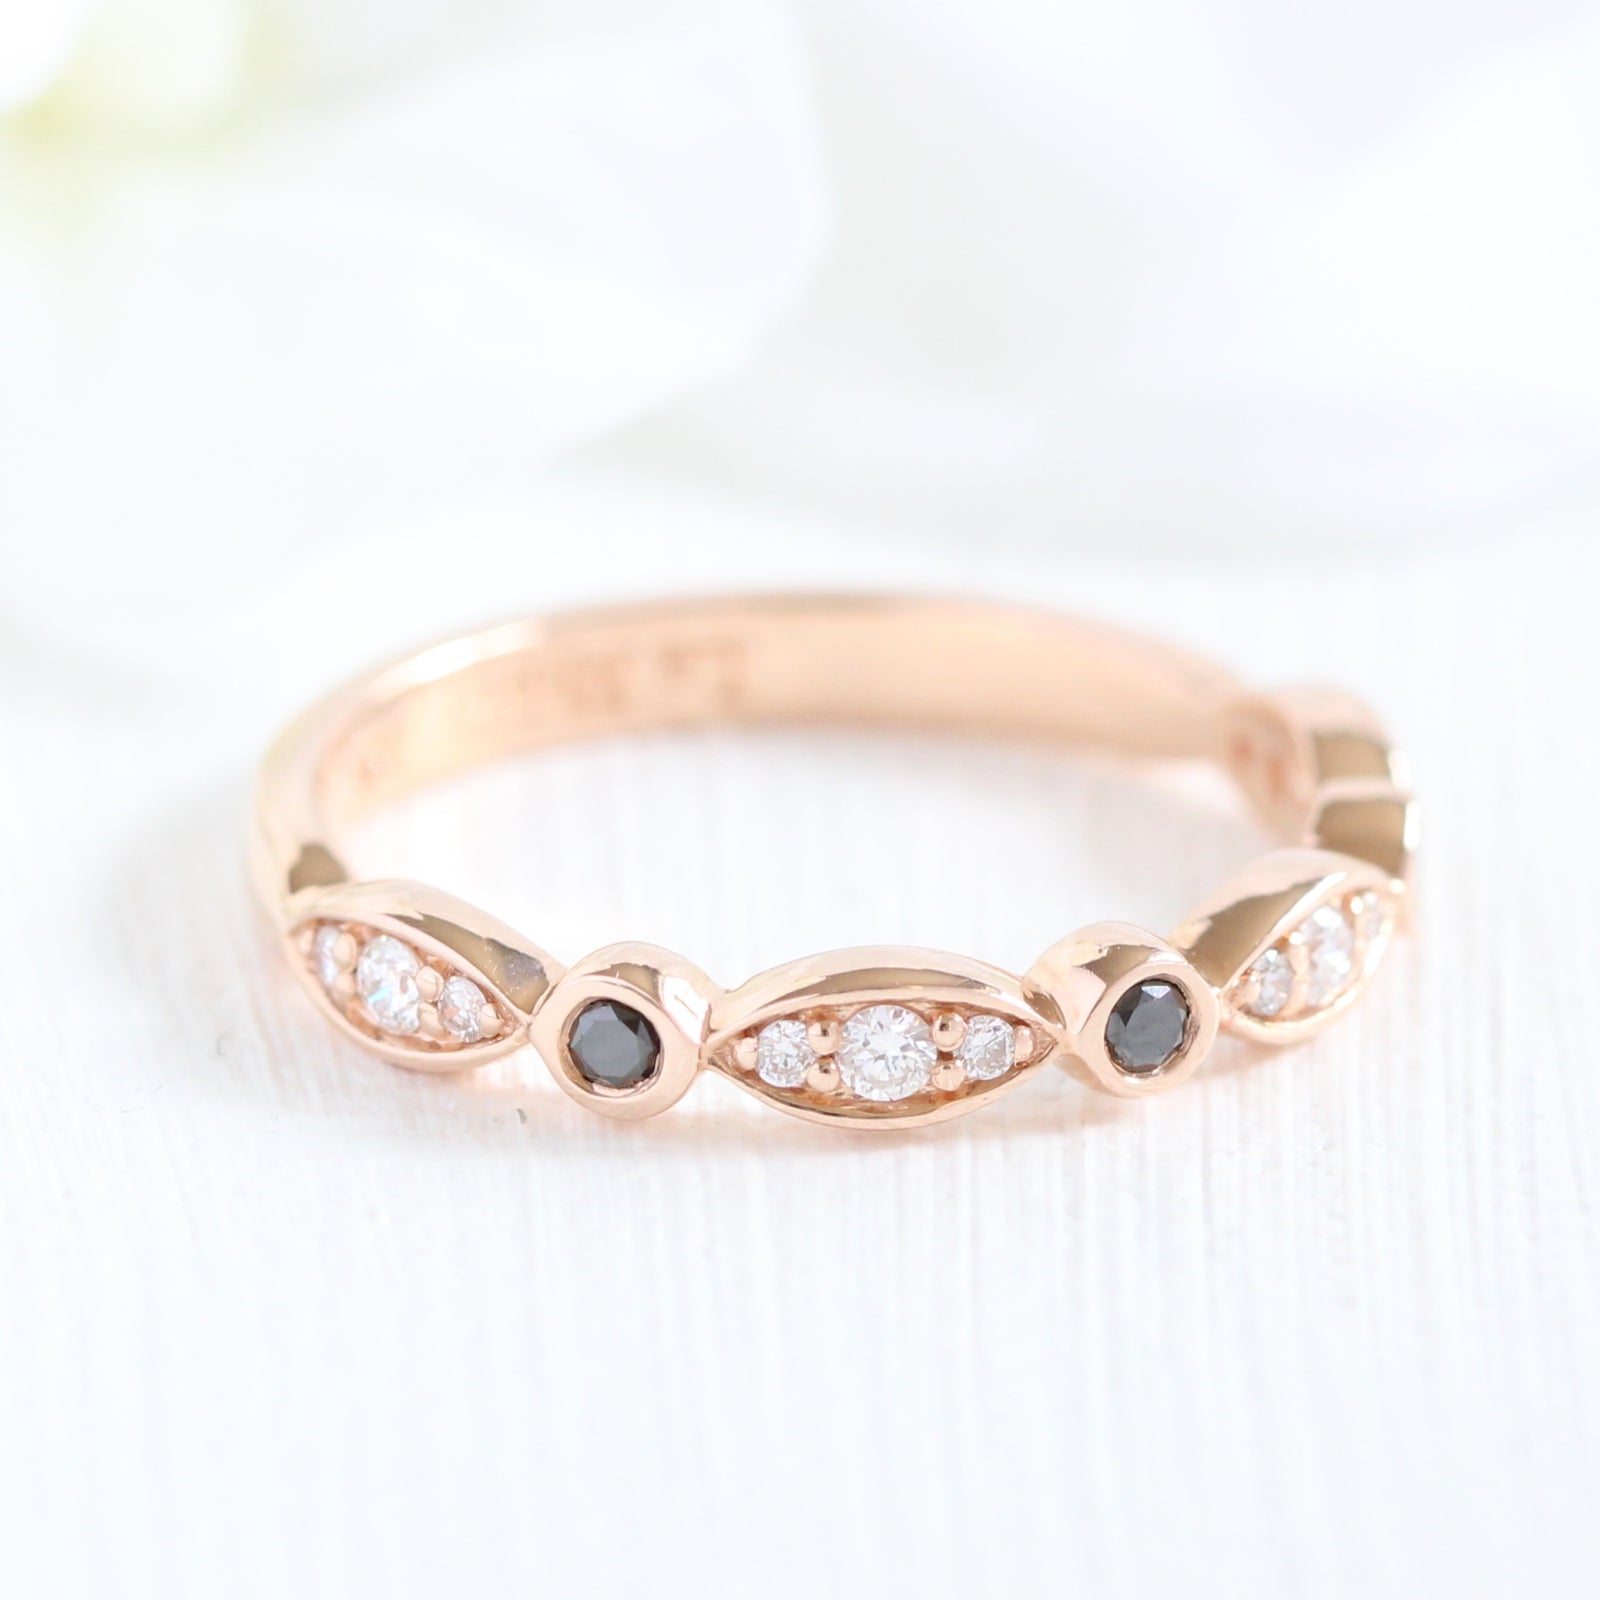 black-and-white-diamond-wedding-band-scalloped-ring-rose-gold-by-la-more-design